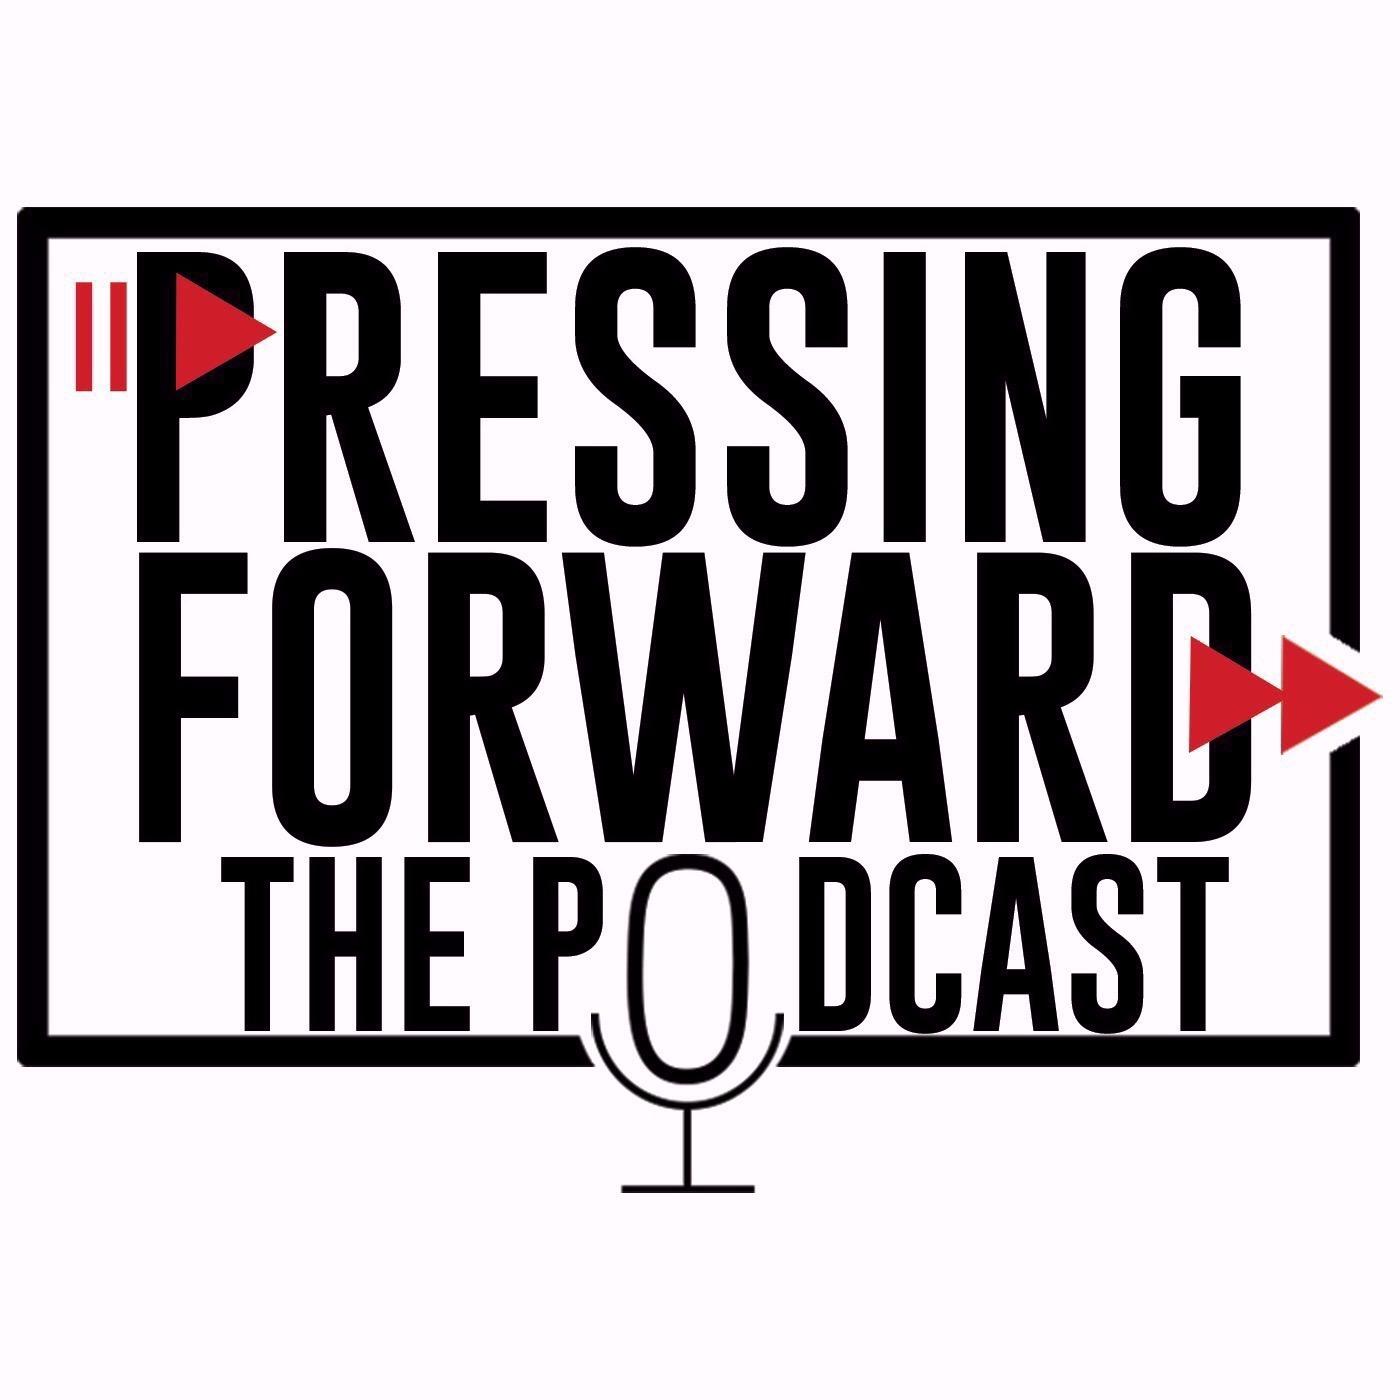 Pressing Forward the Podcast